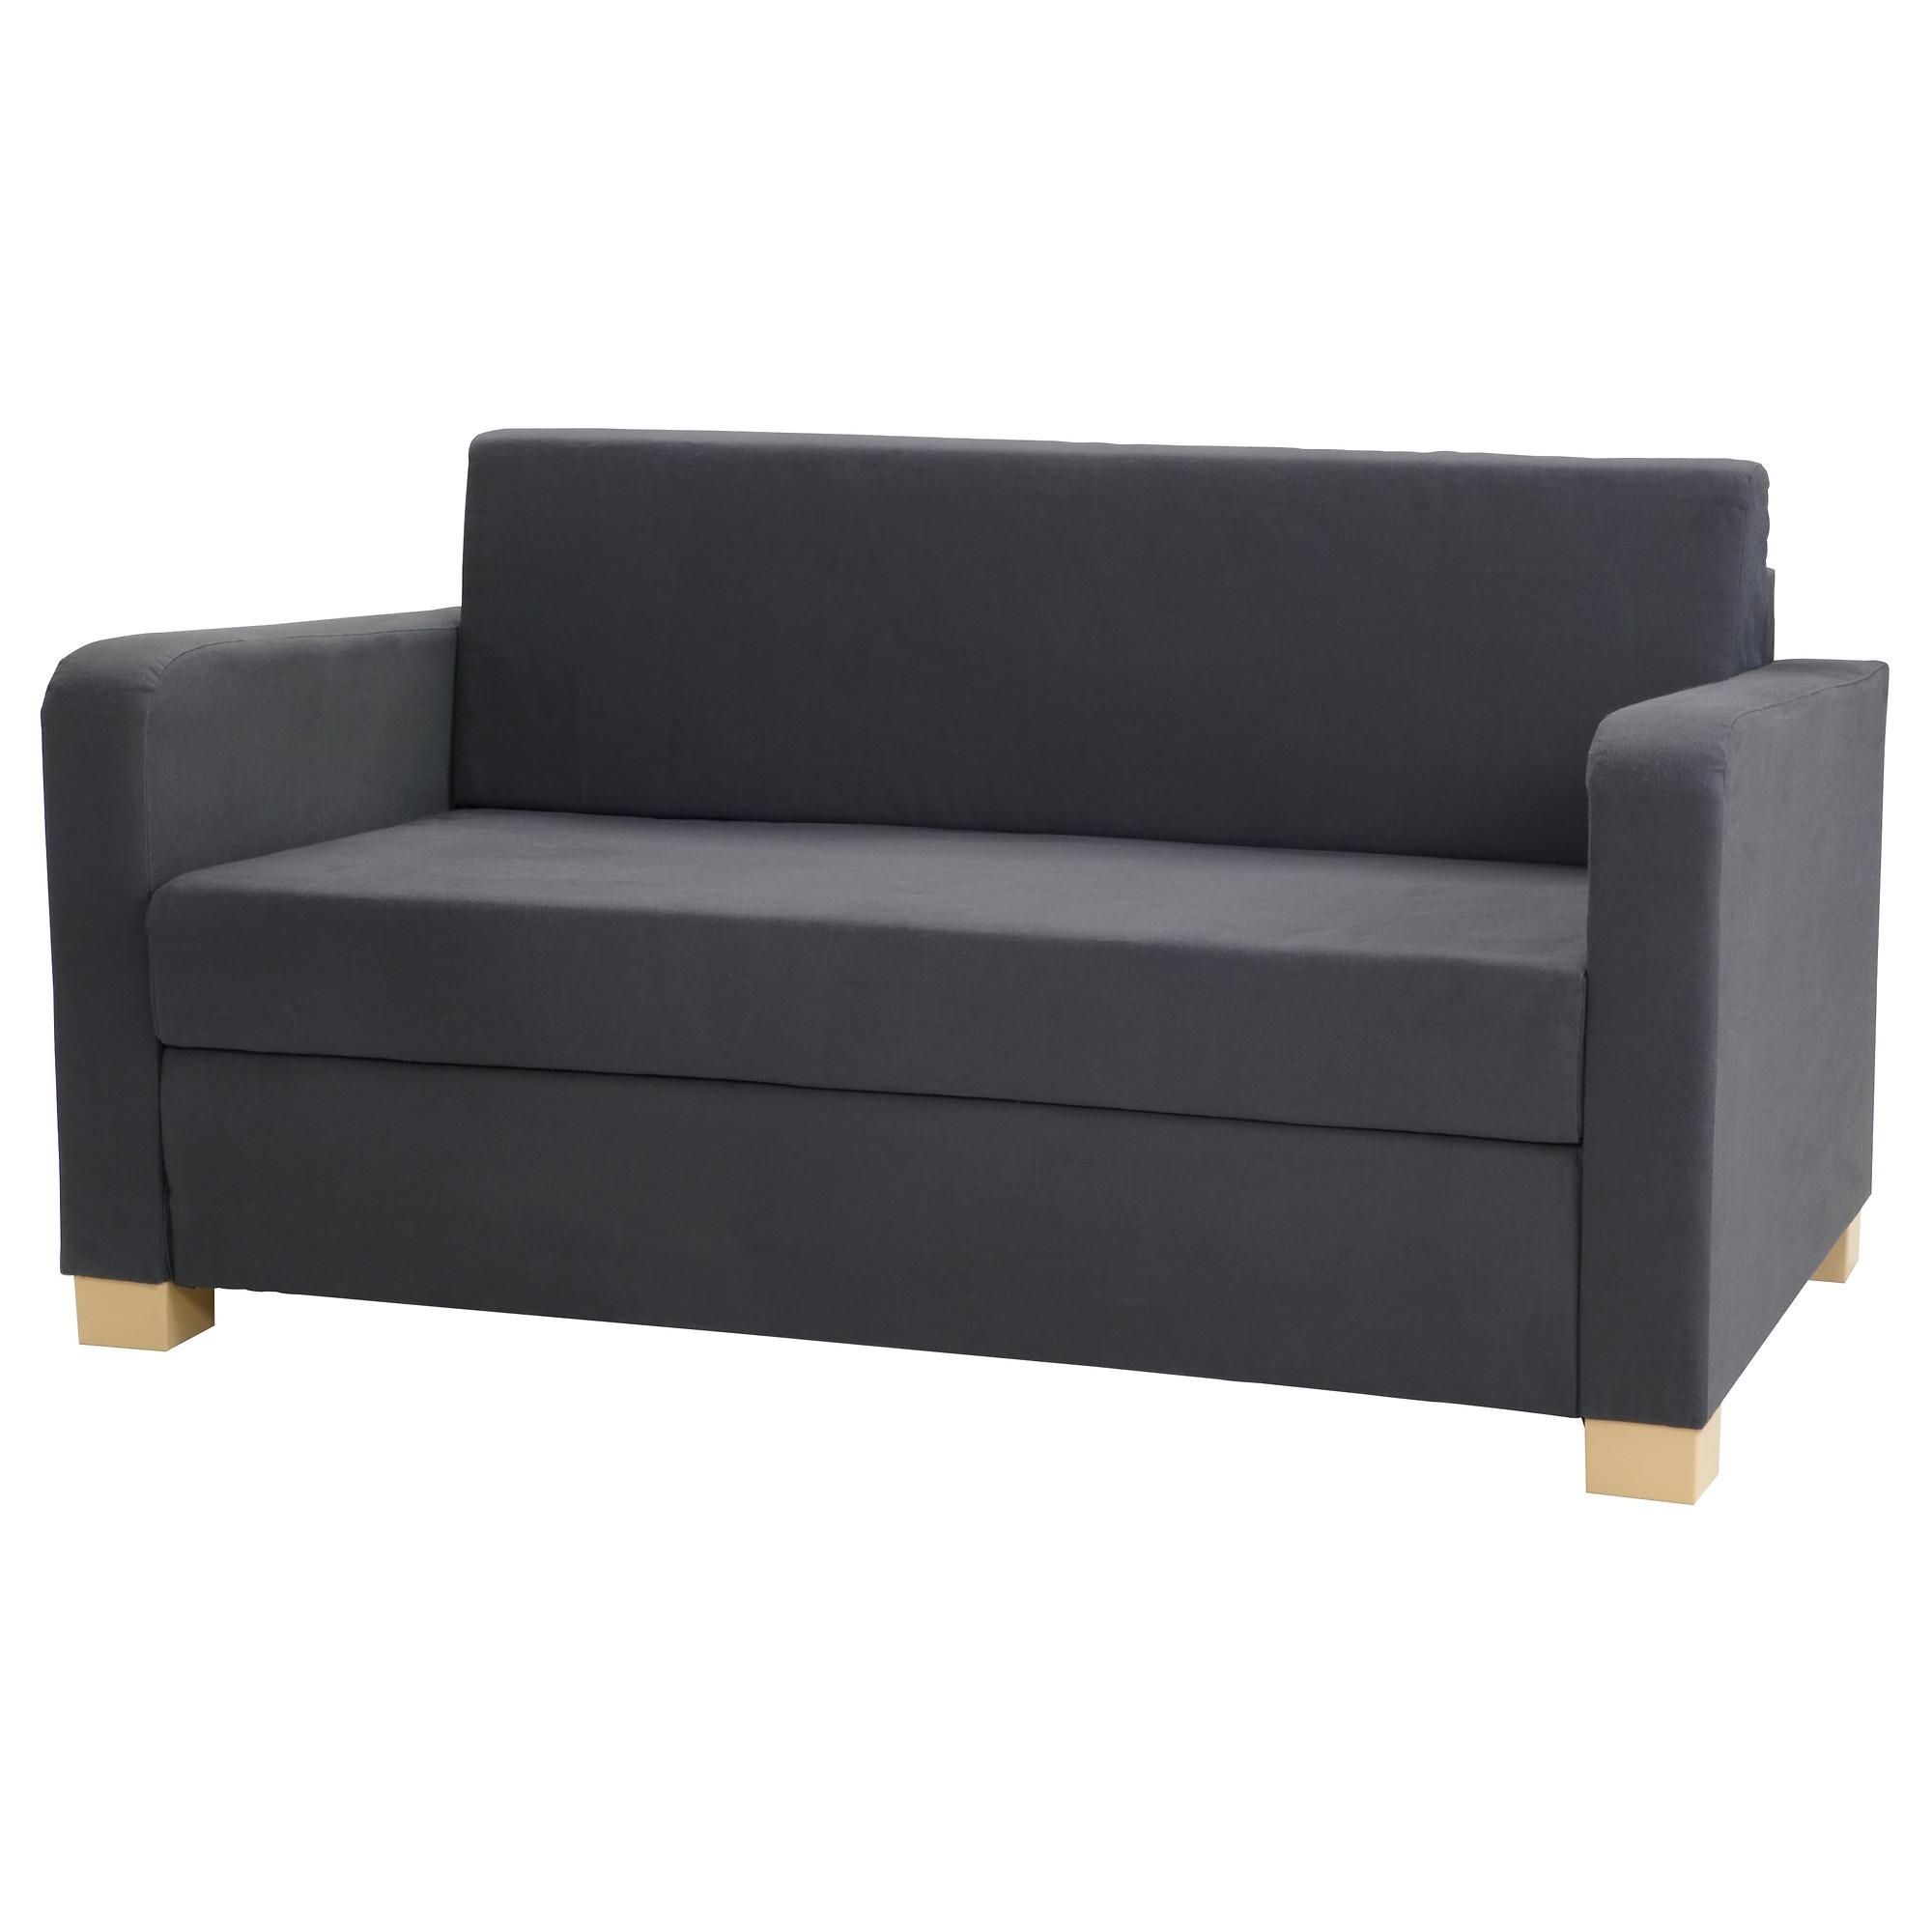 Sofa Beds & Futons – Ikea In Full Size Sofa Beds (View 20 of 20)